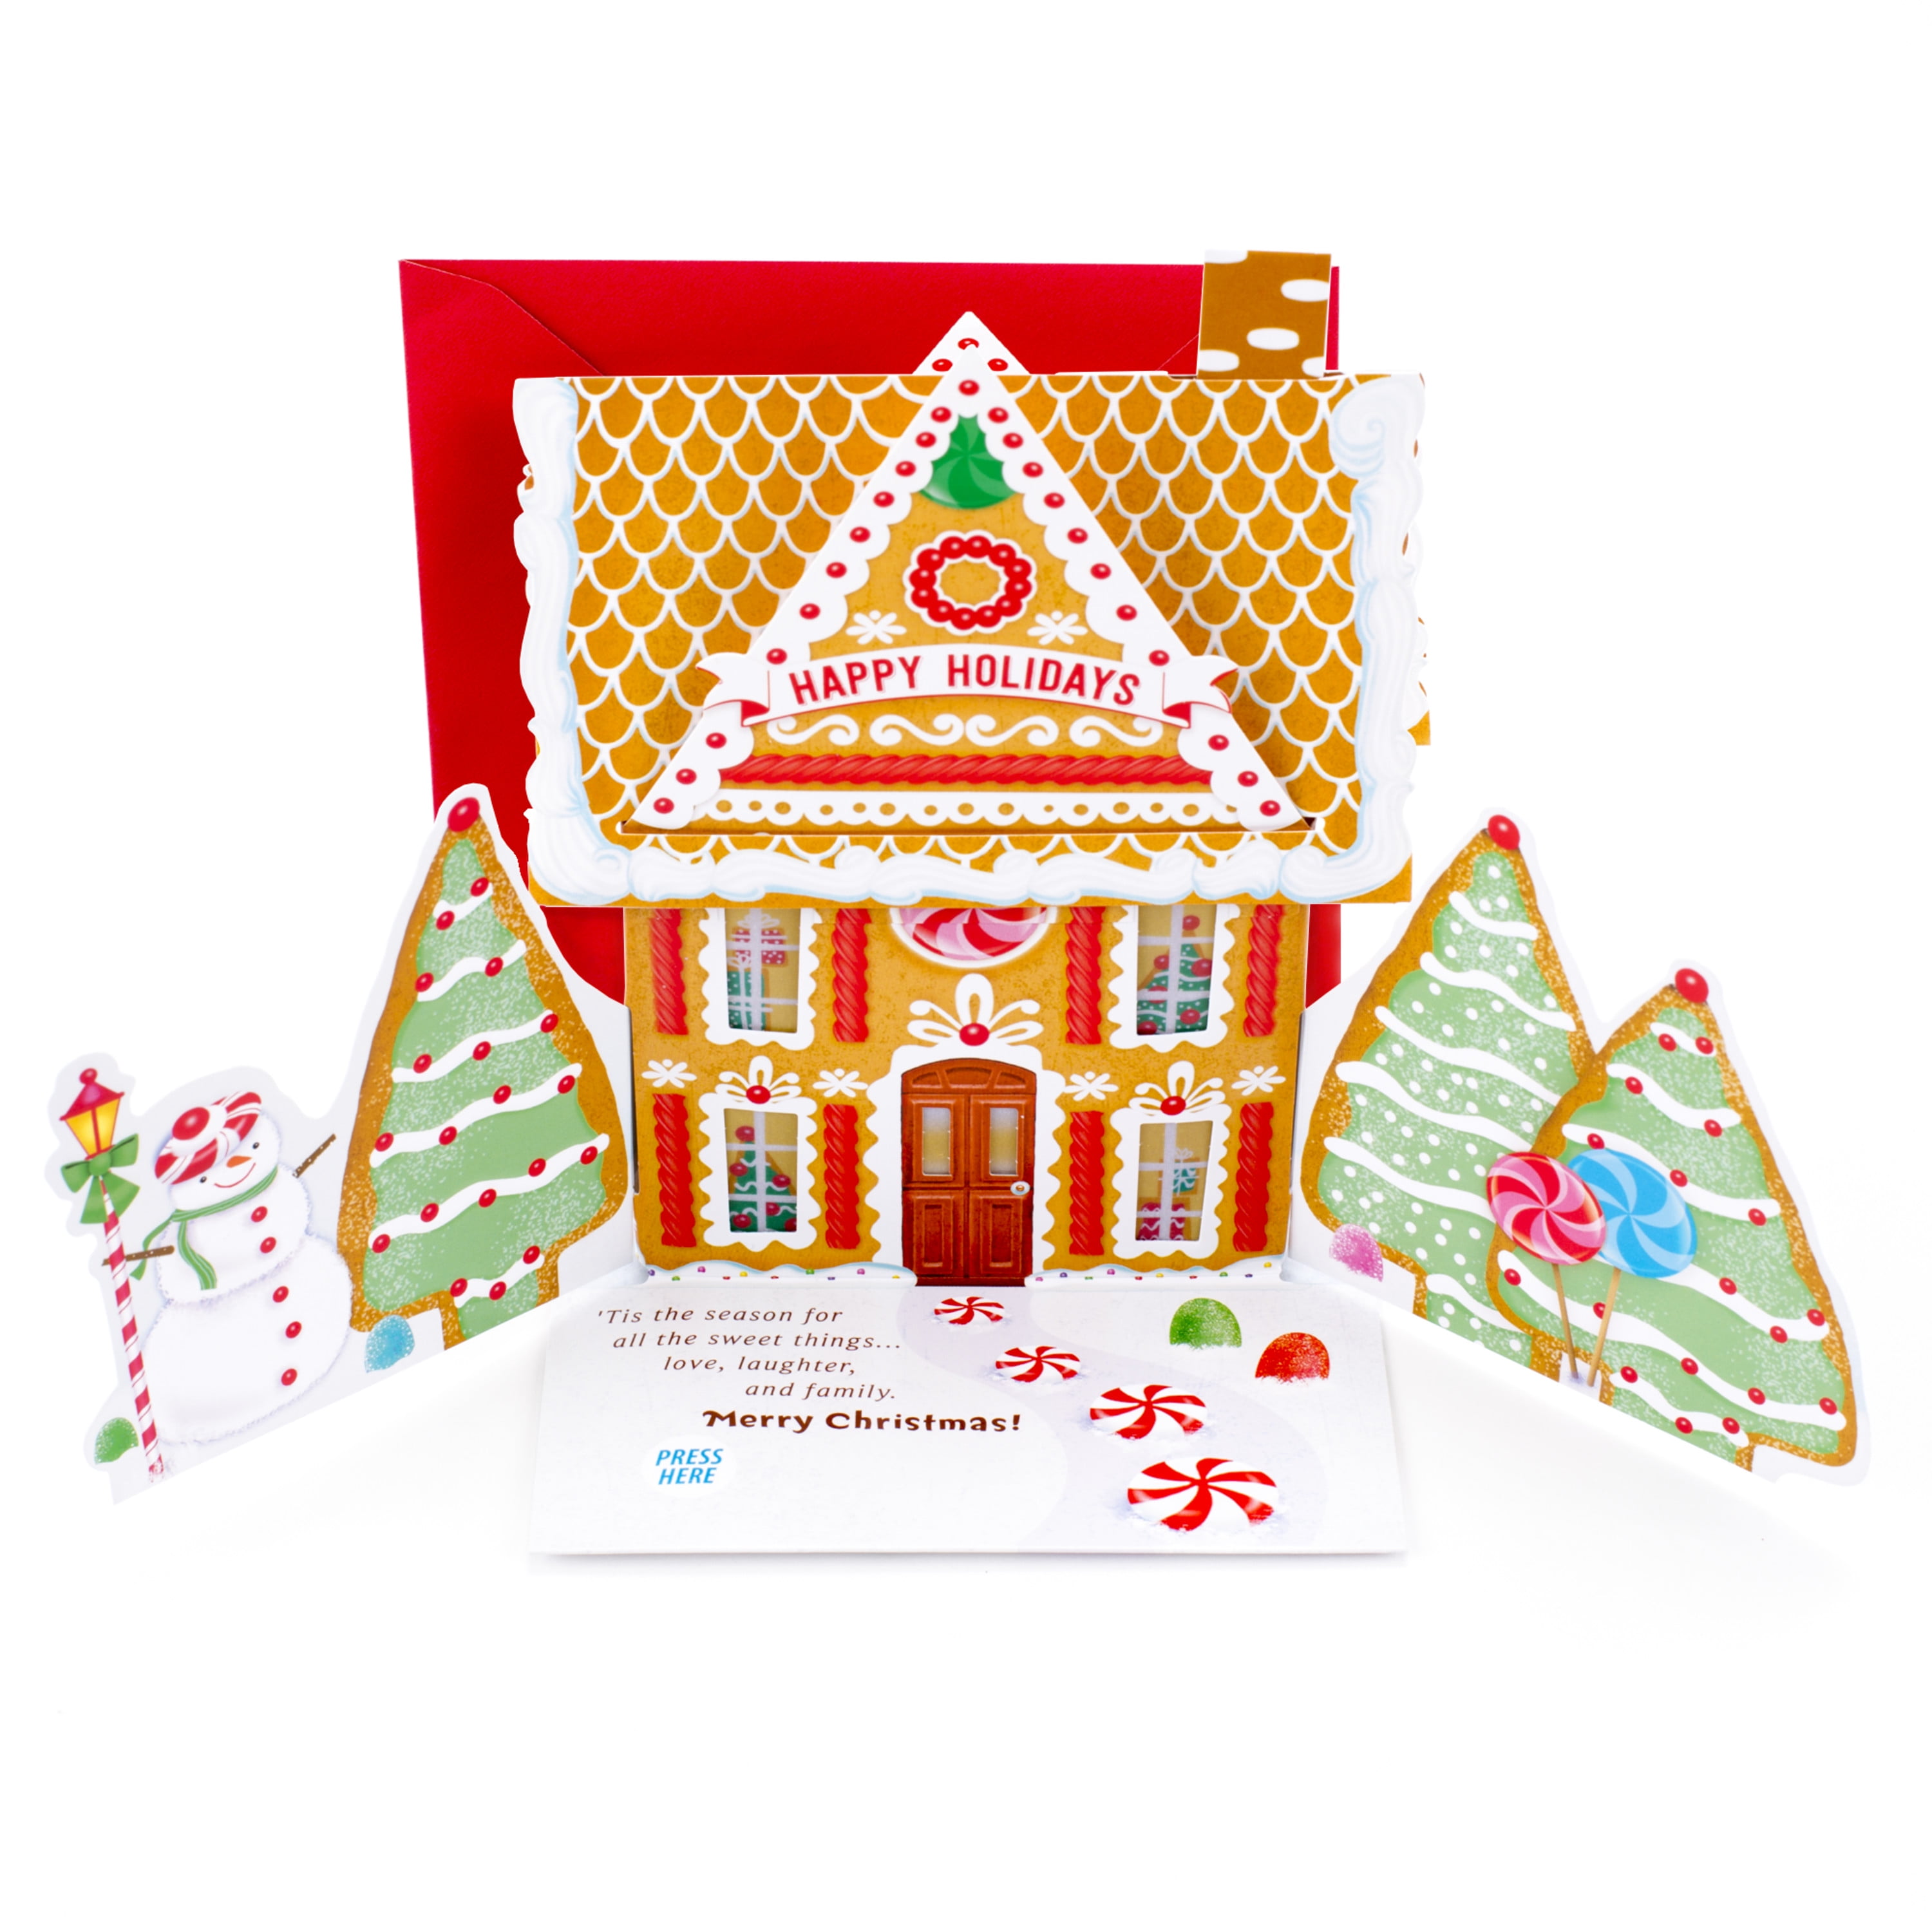 North Pole Bound Model Airplane New! Hallmark Signature Collection Holiday Card 